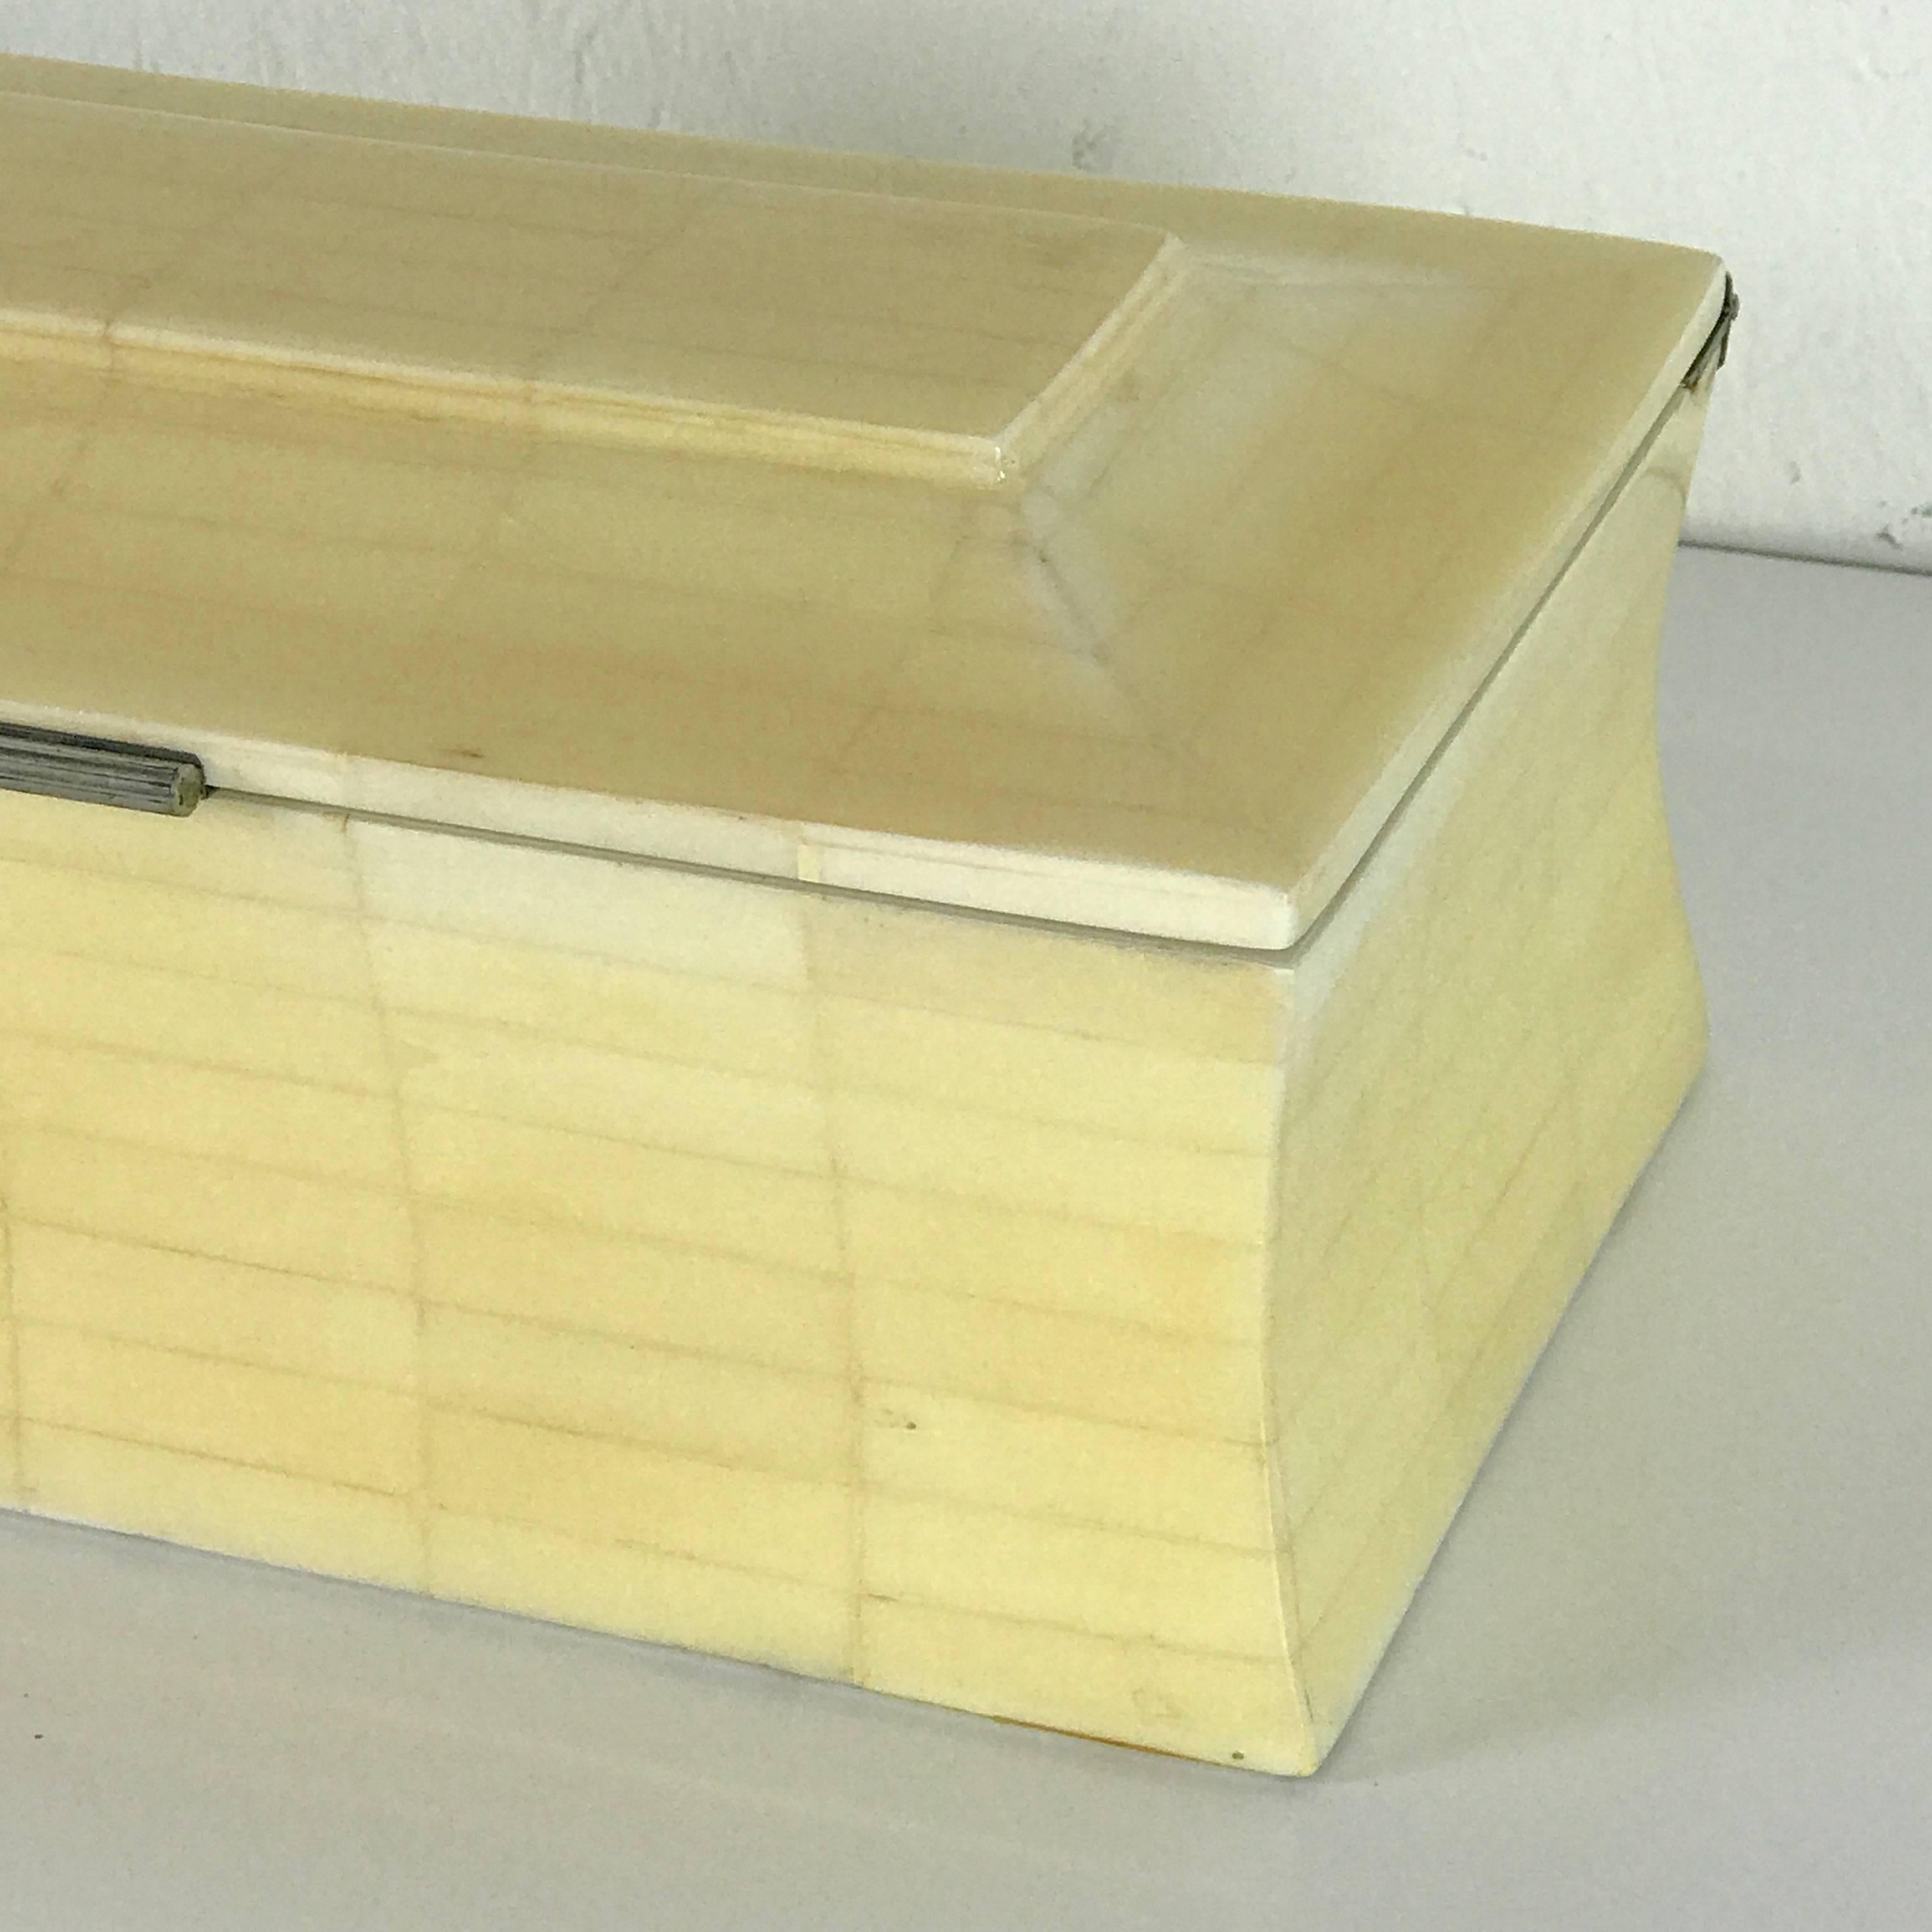 Midcentury Bookmatched Bone Table Box In Excellent Condition For Sale In Atlanta, GA